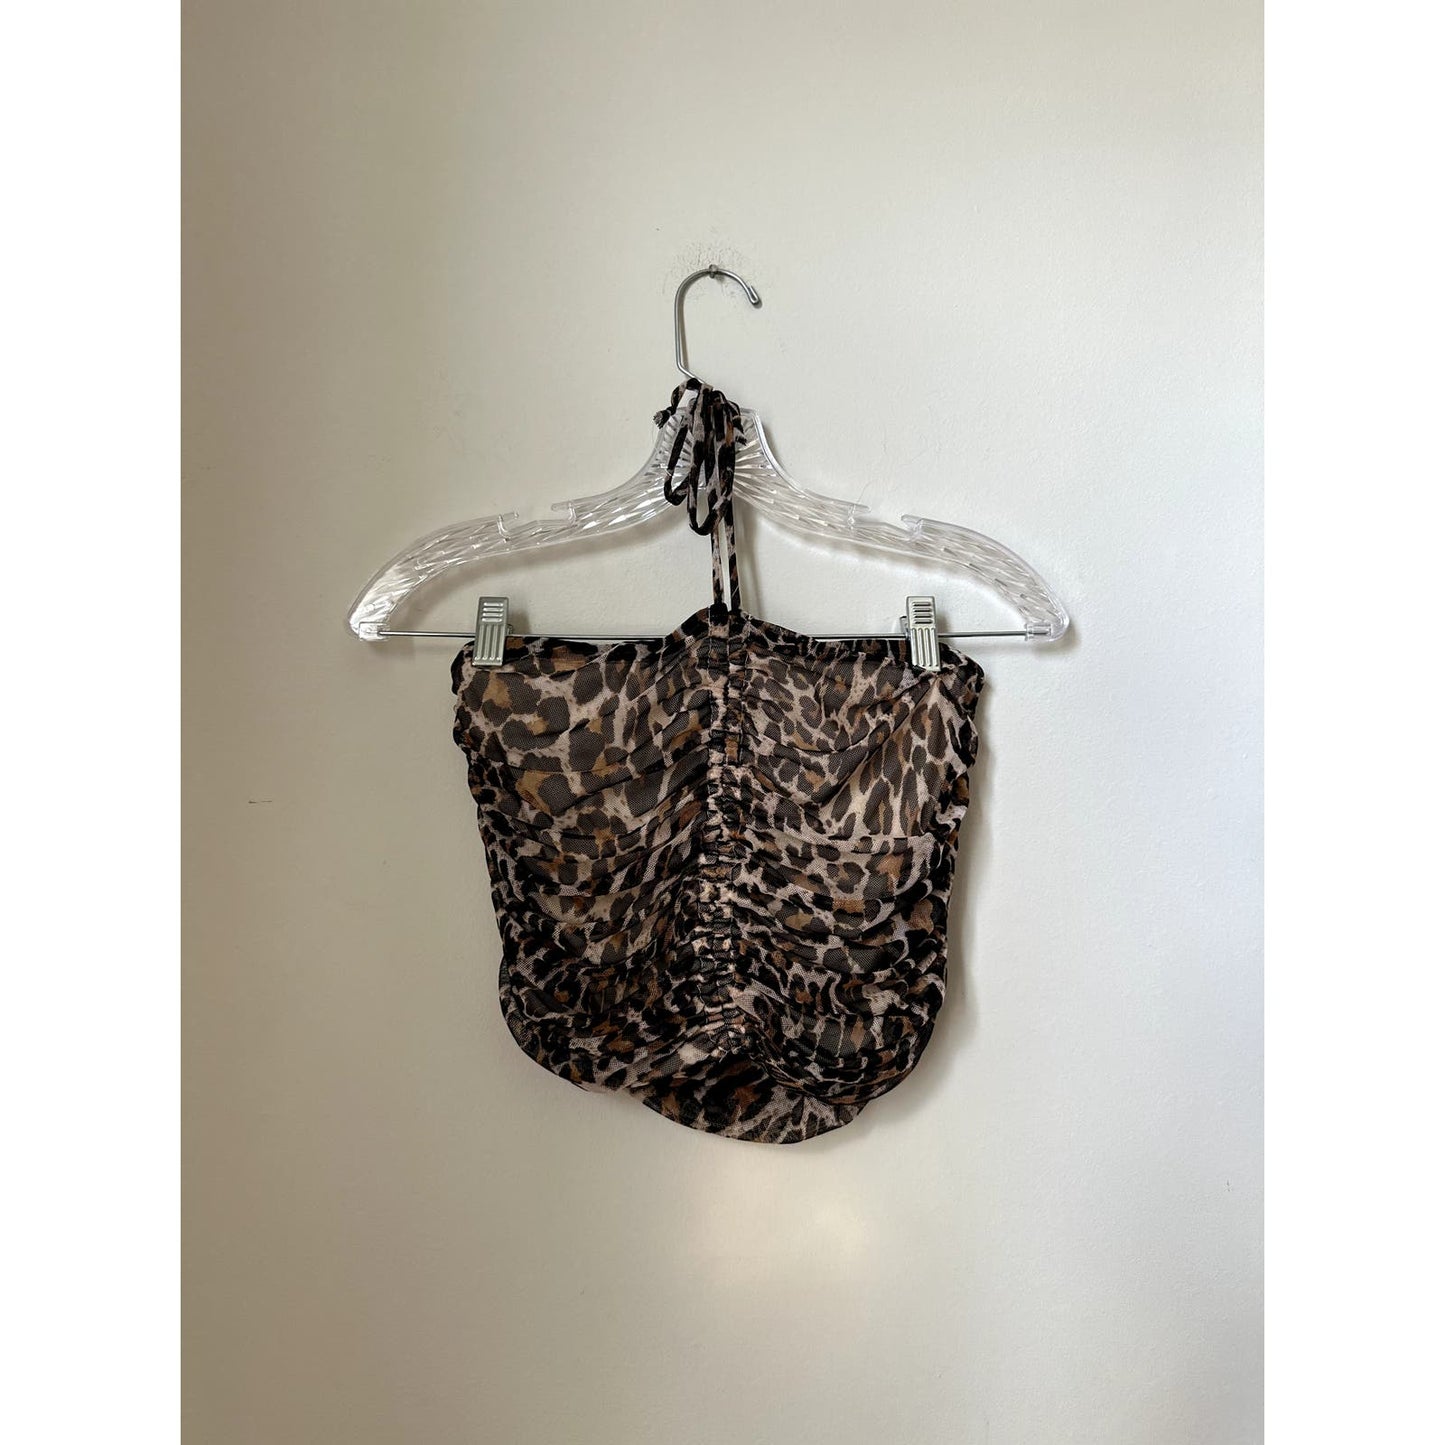 Urban Outfitters Cheetah Print Crop Top Halter Tank, Size Small